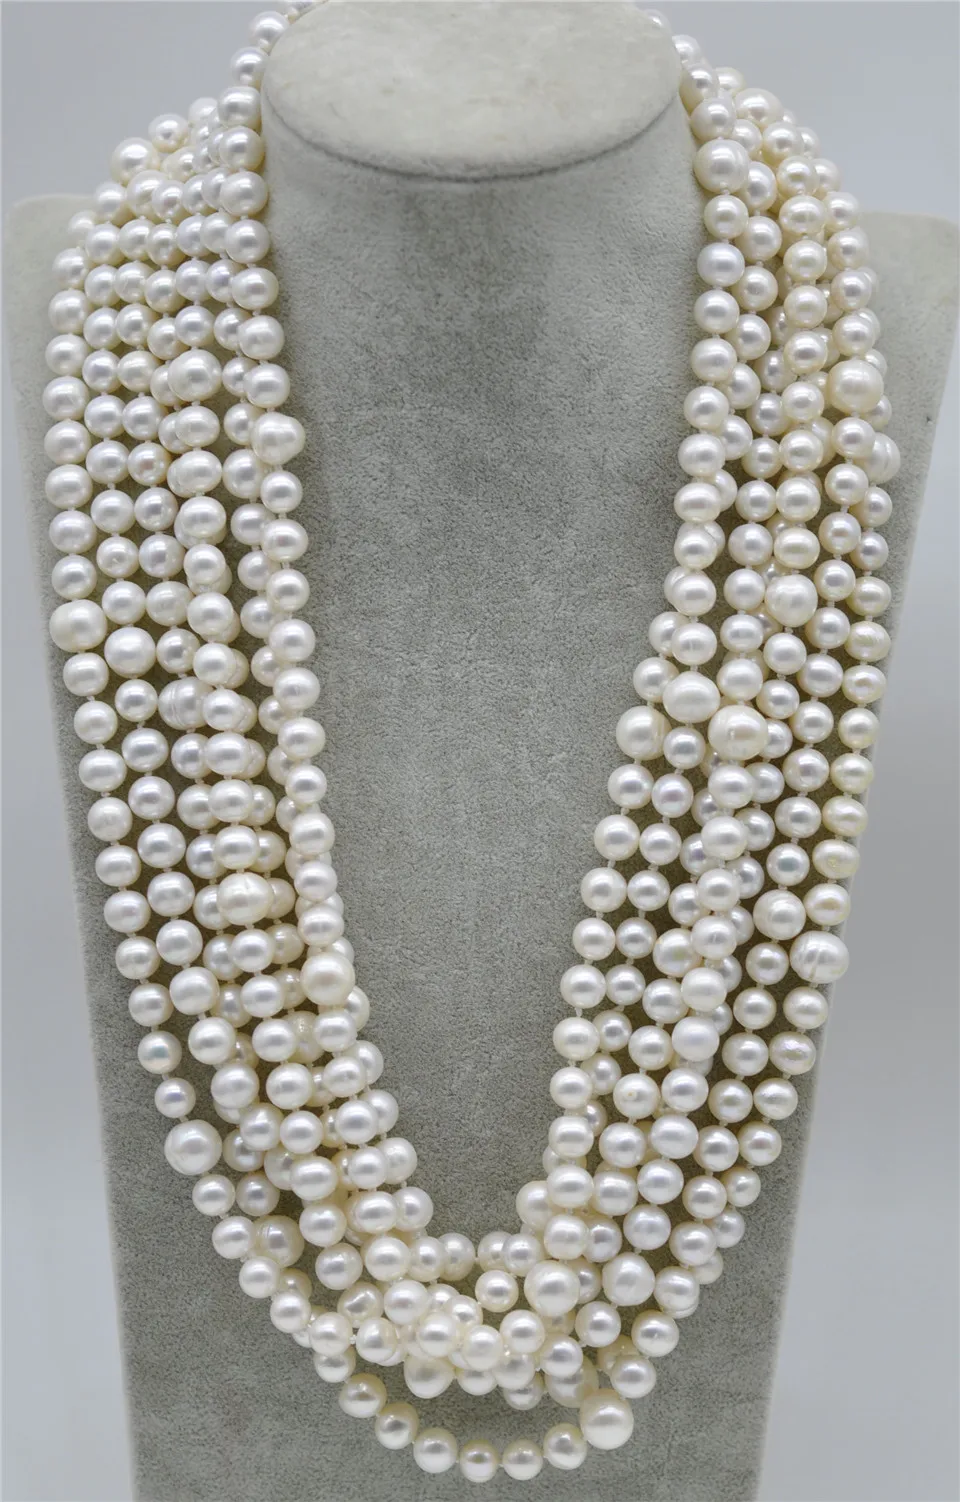 

HABITOO 170"wonderful Longest South Sea WHITE 8-9MM AND 10-11MM PEARL NECKLACE Jewelry Chains Necklace for Woman Choker Chain